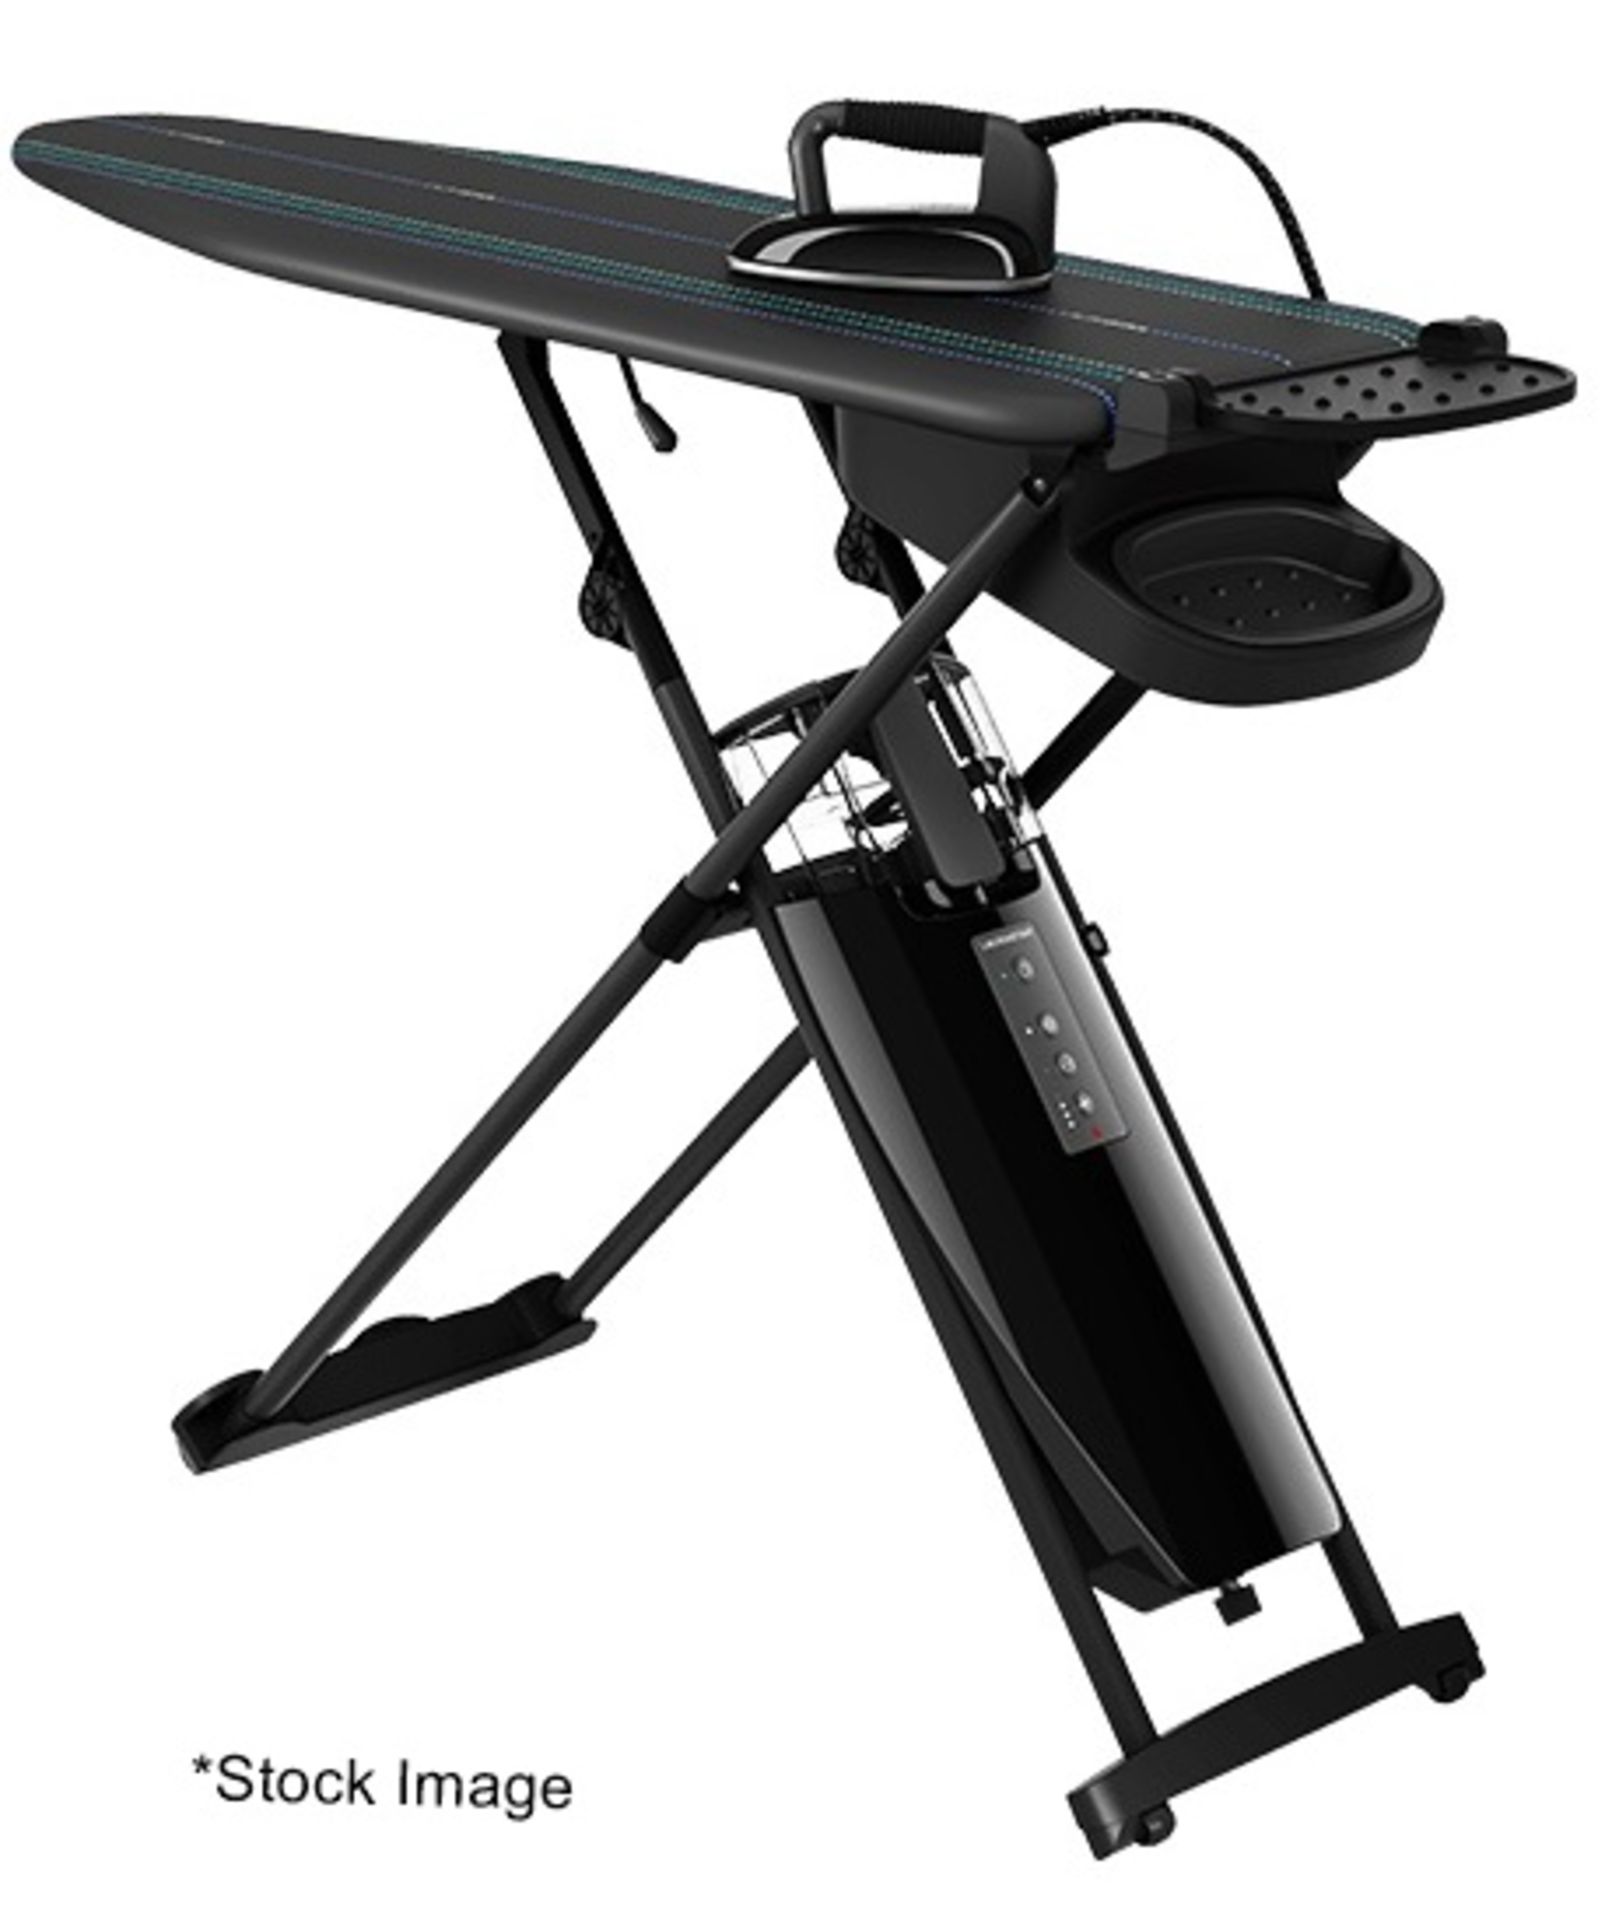 1 x LAURASTAR 'Smart U' Ironing Board Steam System With Integrated Bluetooth Technology - RRP £1,799